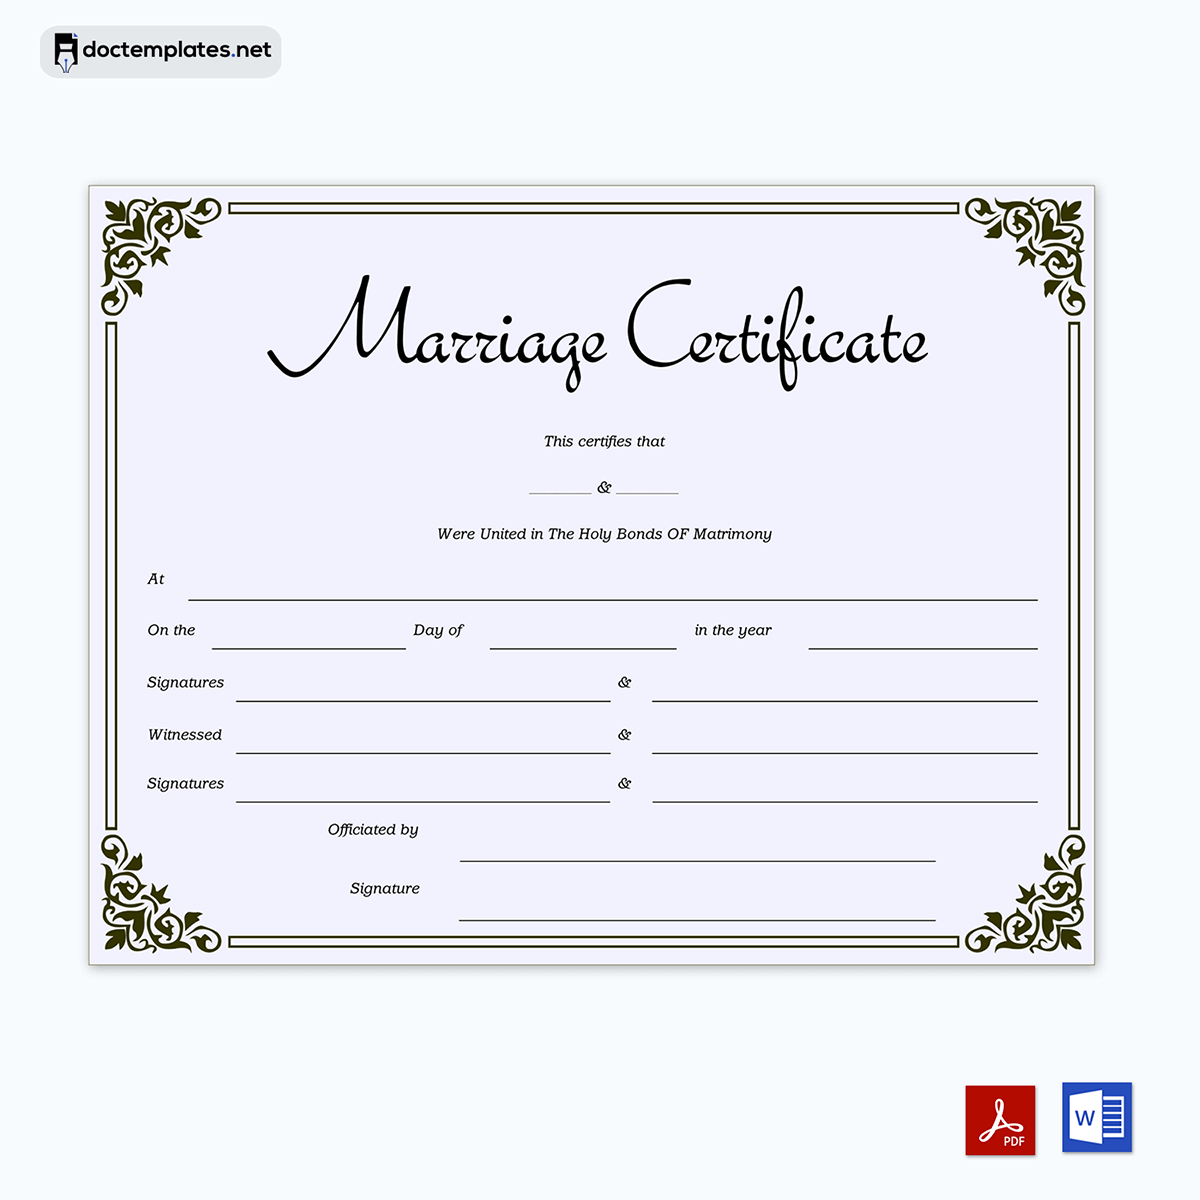  marriage certificate pdf download 05